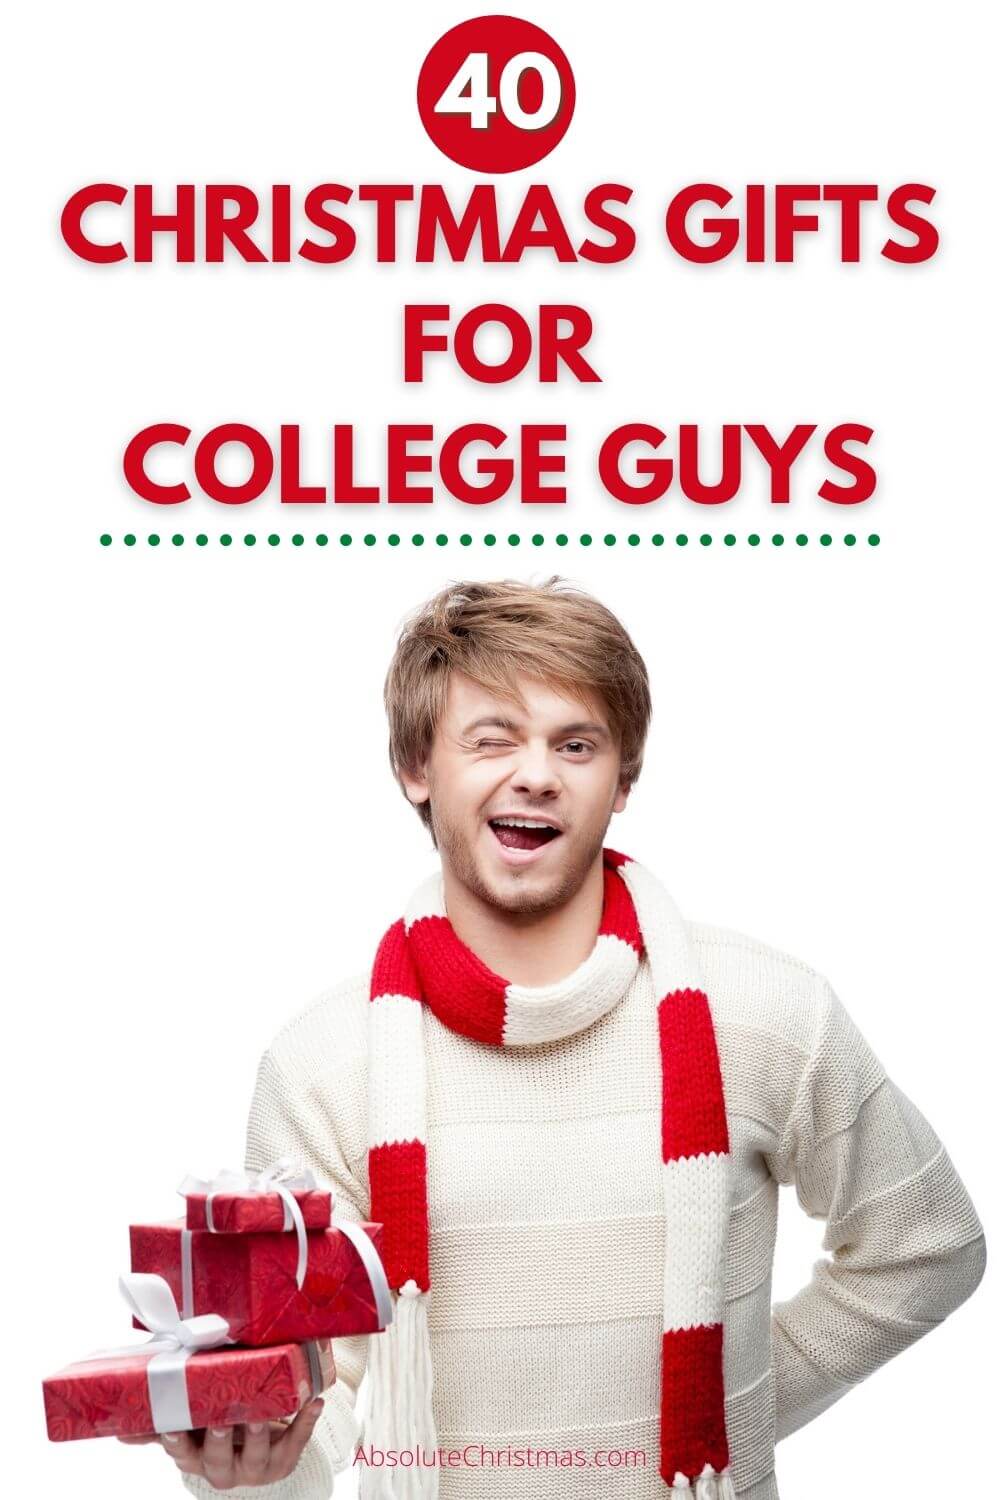 Christmas Gifts For College Guys | Not sure what to buy for your boyfriend, friend, or any college-aged guy you know? Here are 40 awesome Christmas gifts for college guys!